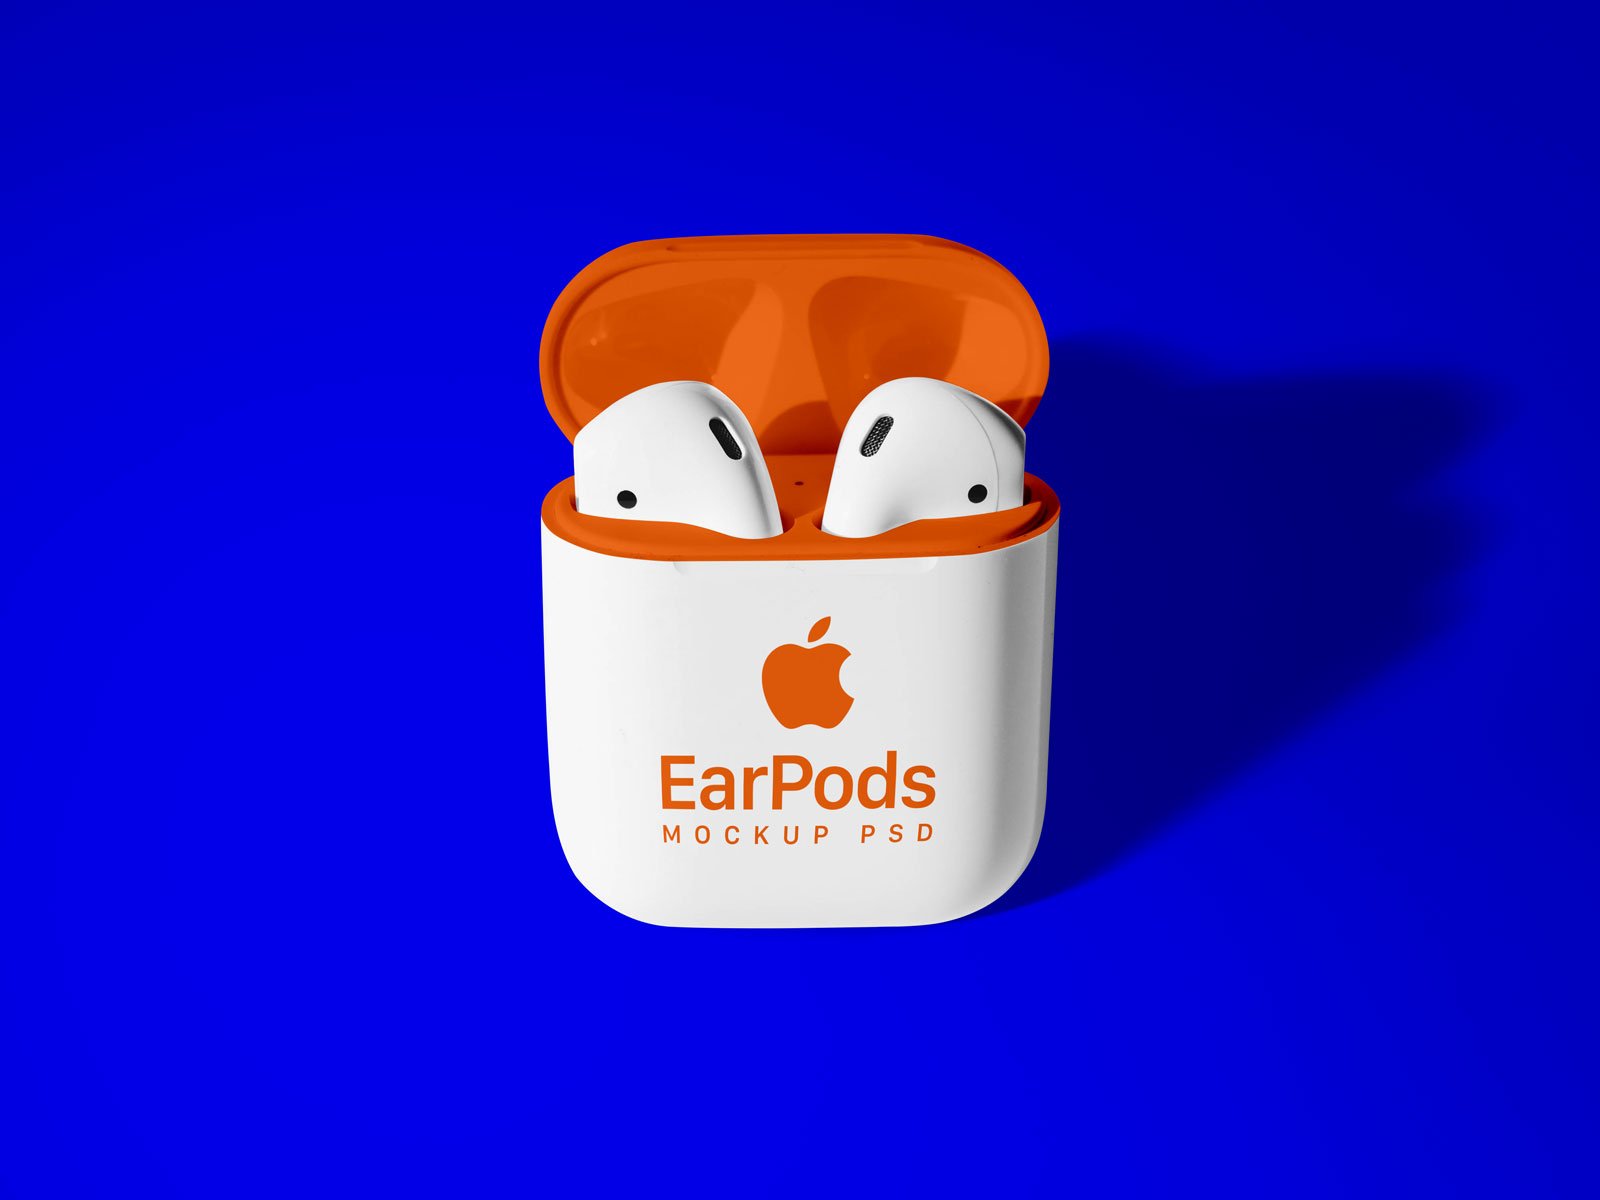 Download Free Apple AirPods 2 Mockup PSD | Designbolts